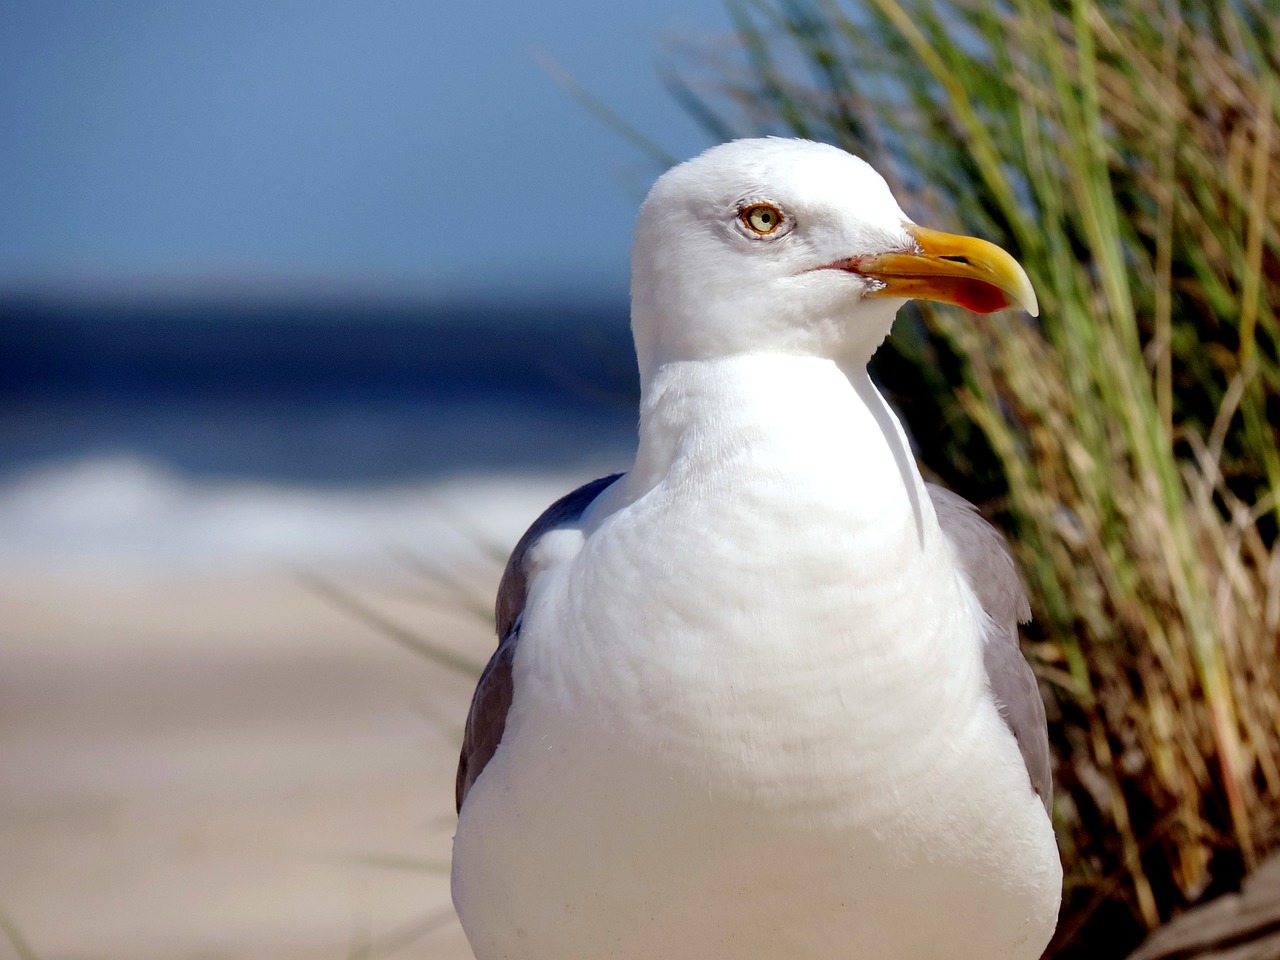 a close up of a seagull on a beach, a portrait, by David Garner, vacation photo, looking out at the ocean, a tall